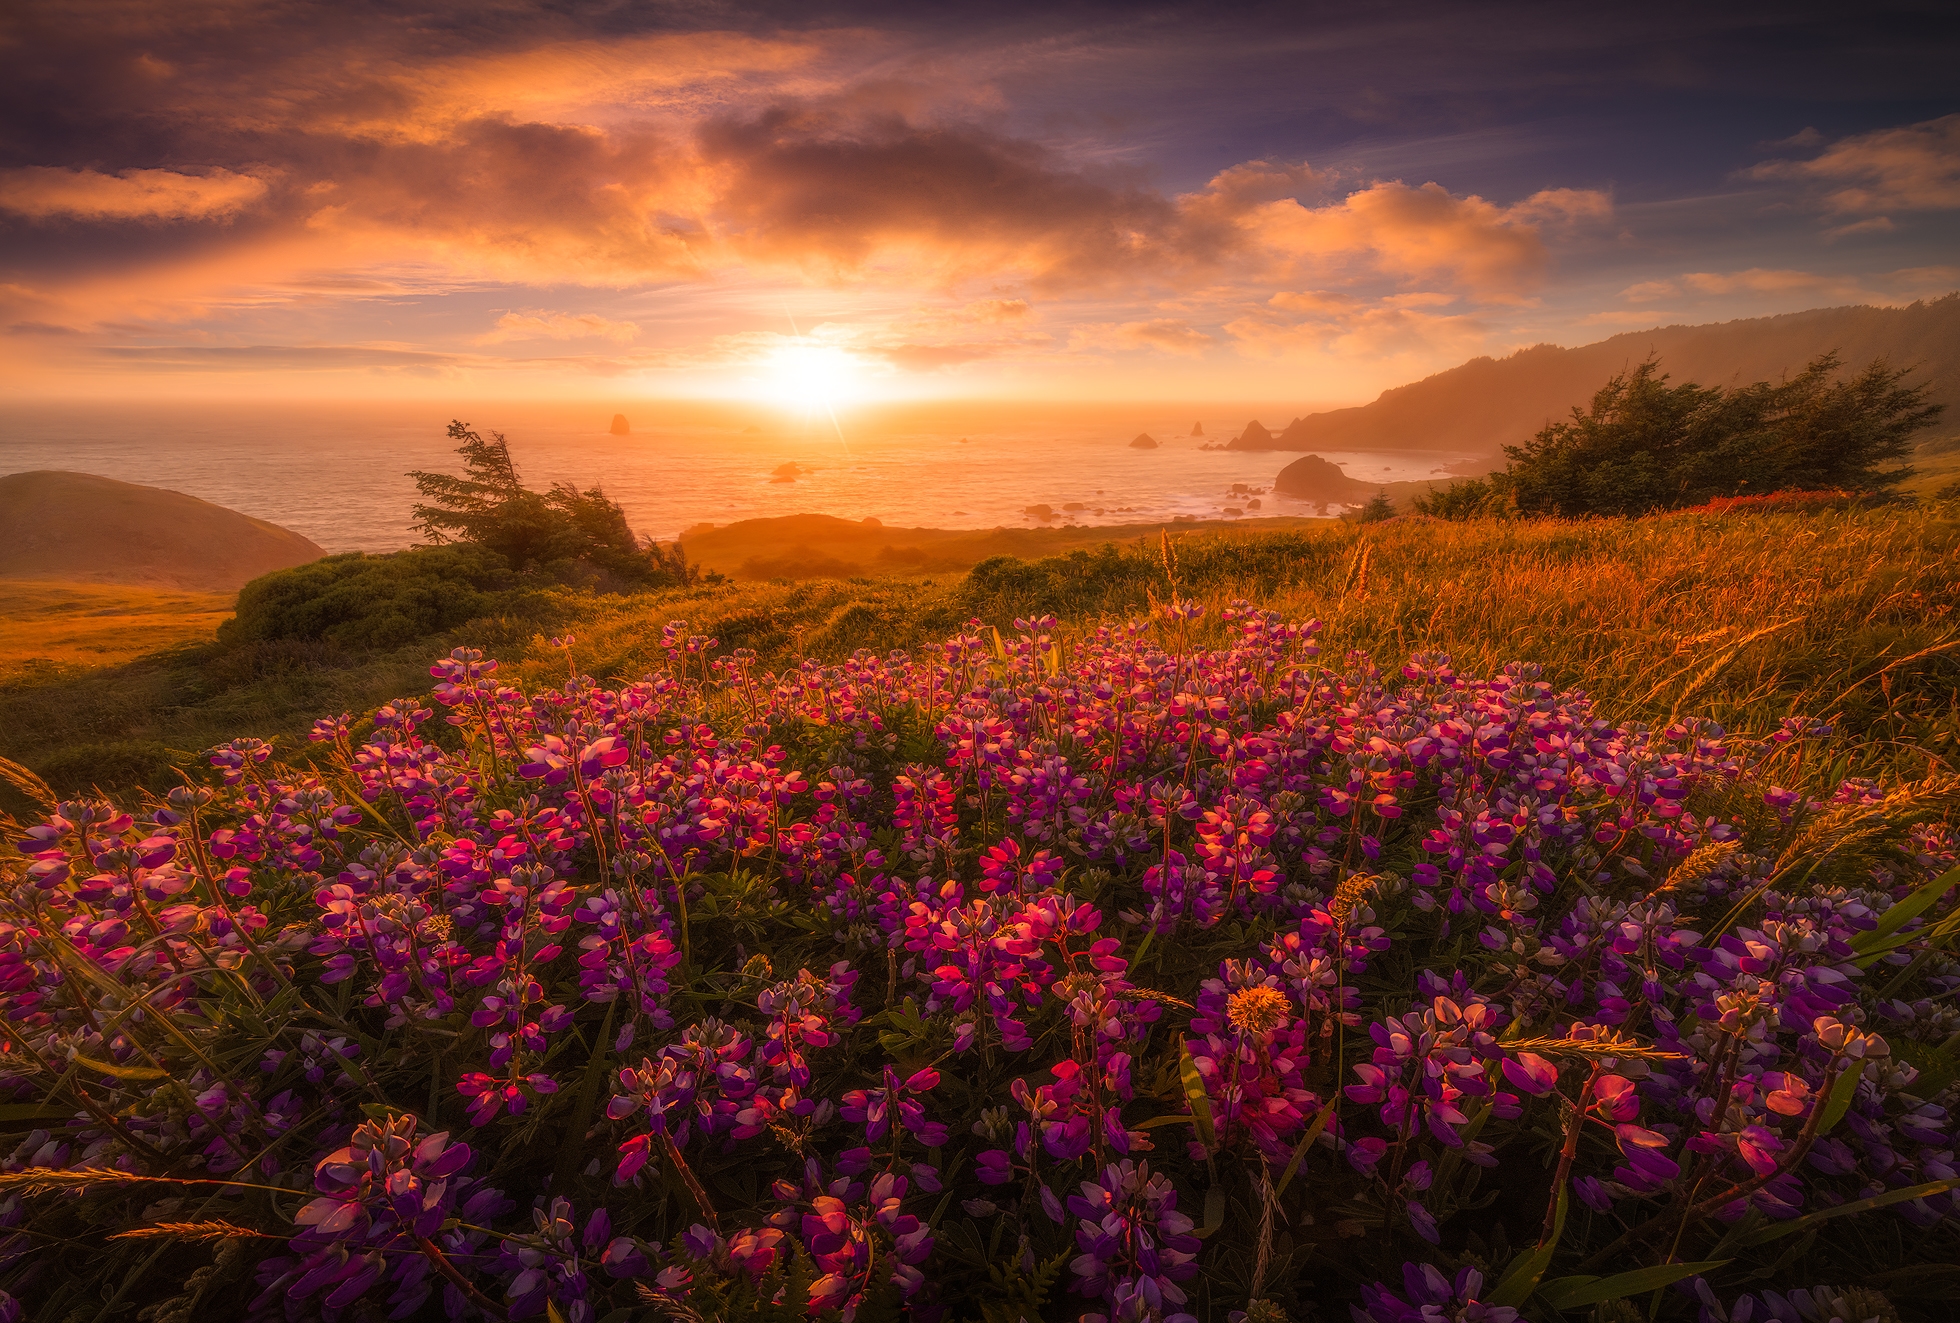 View sunset photos, flowers